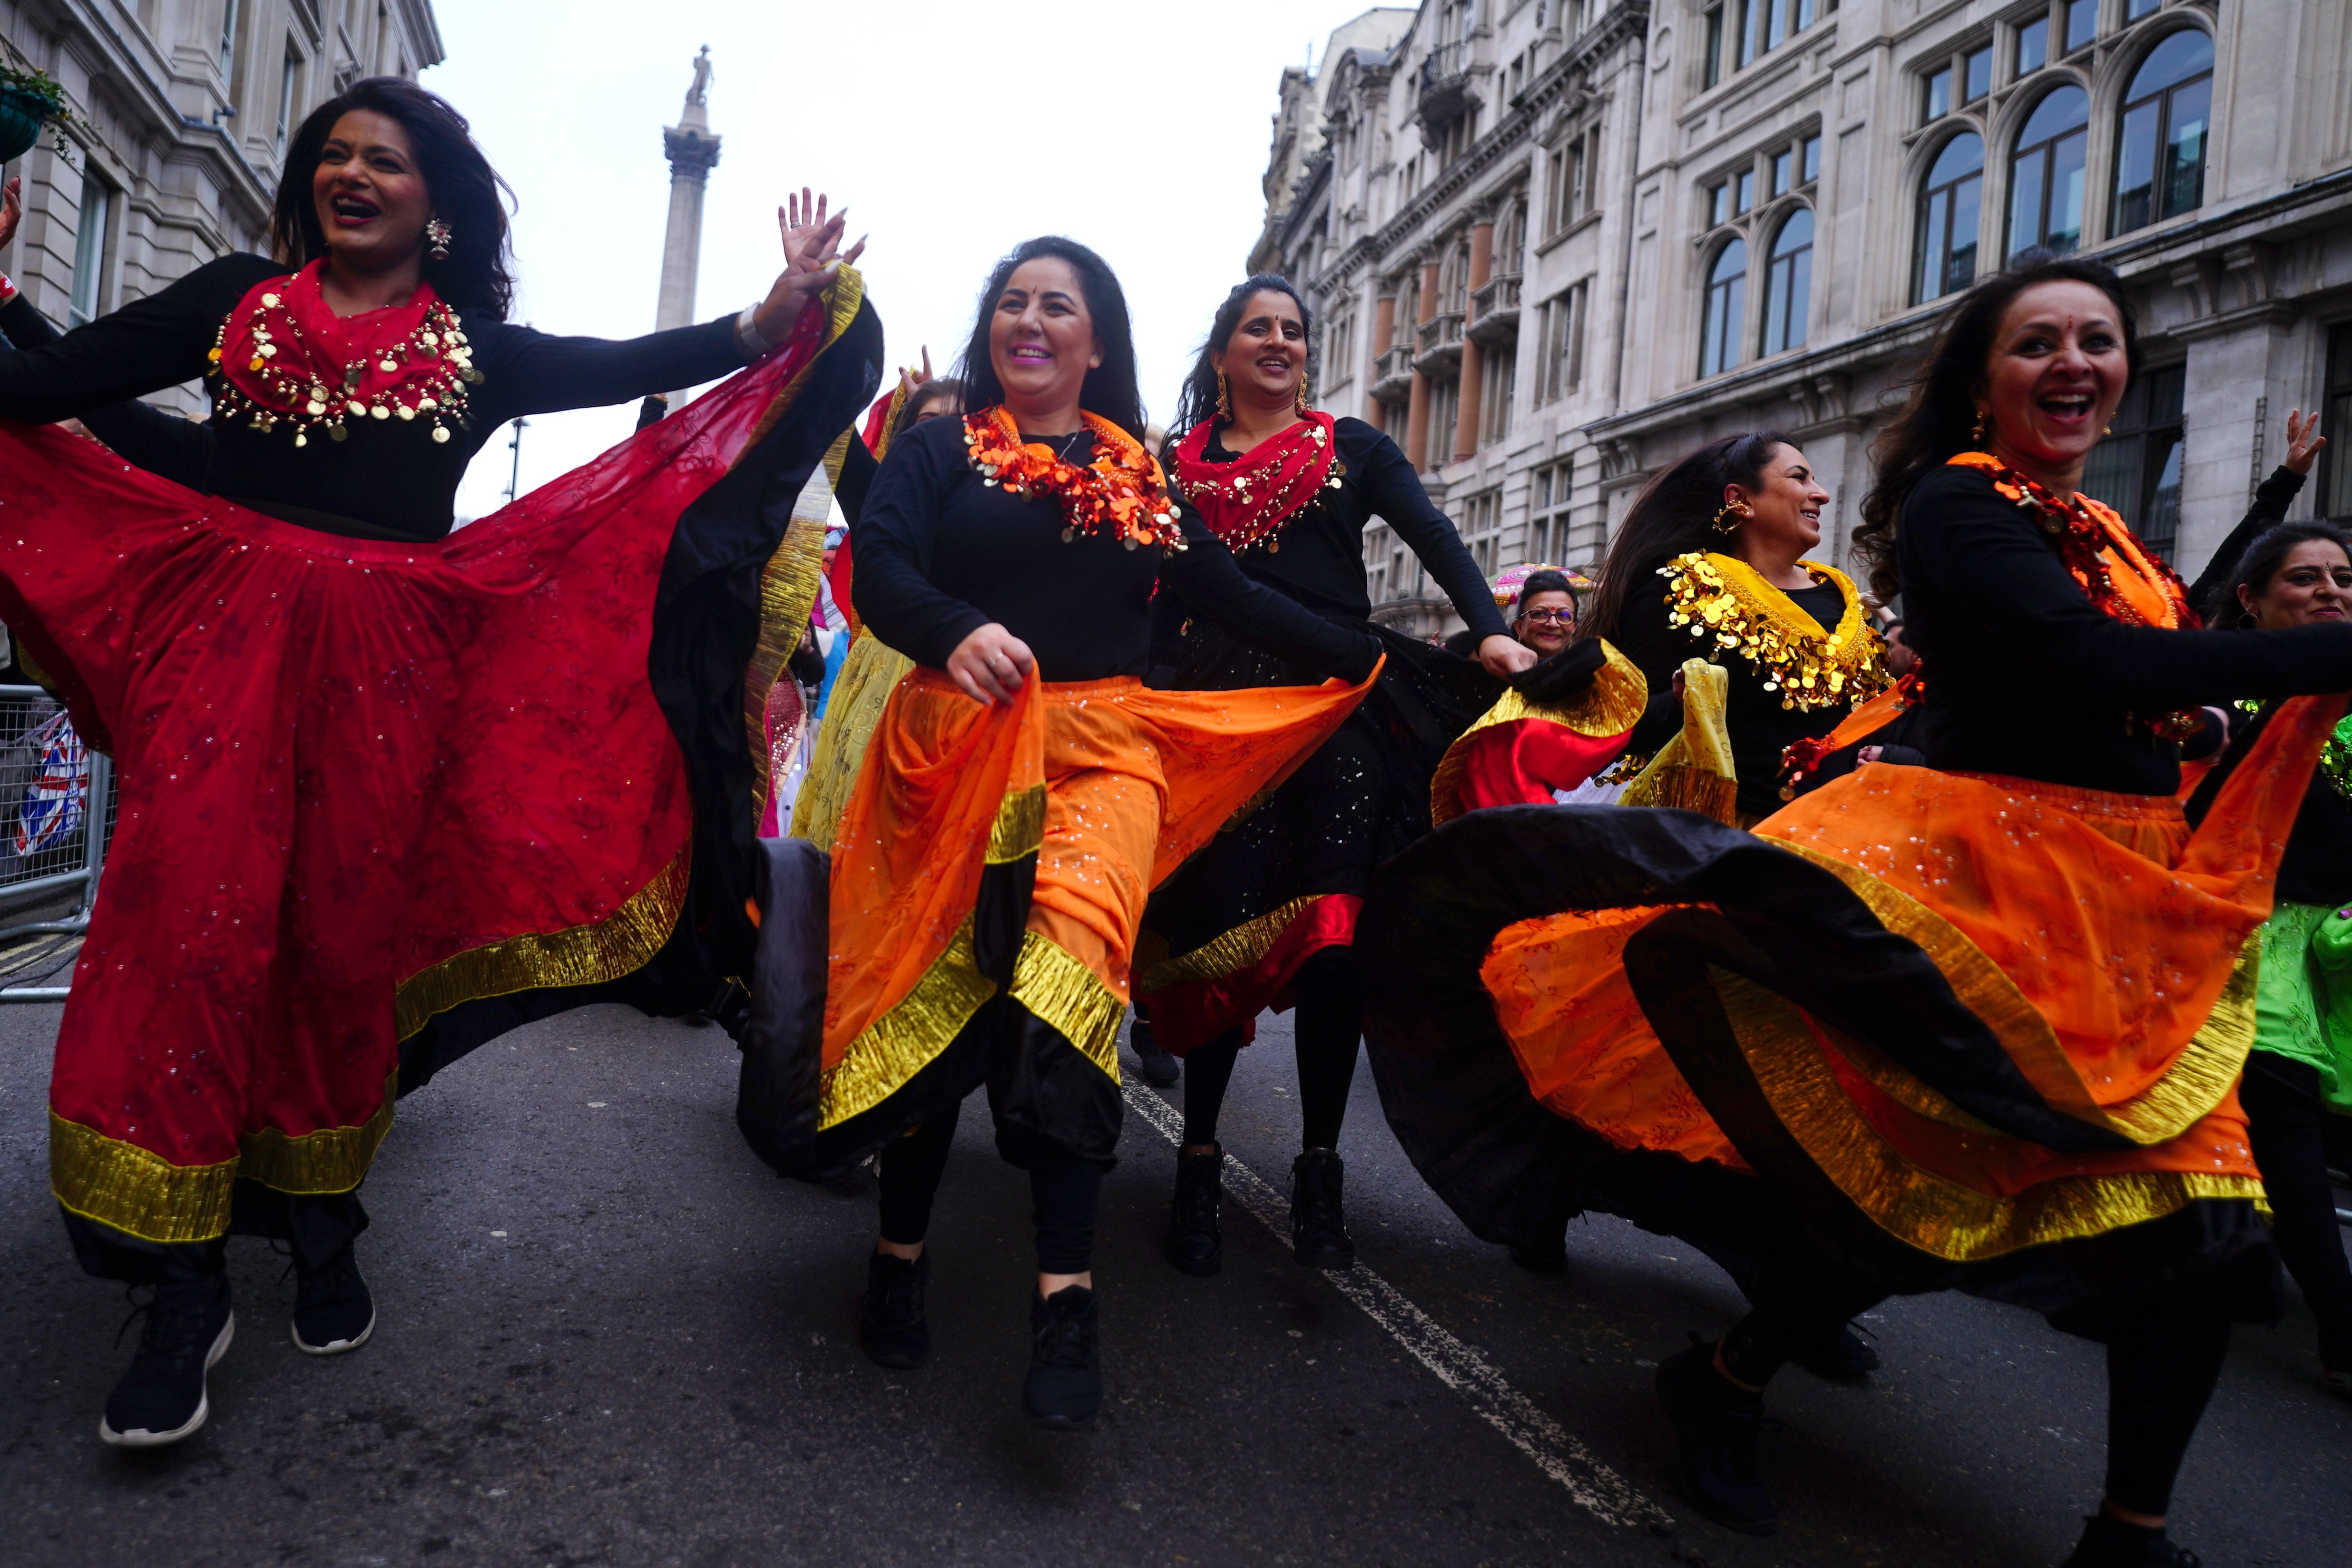 Performers during London’s New Year’s Day parade